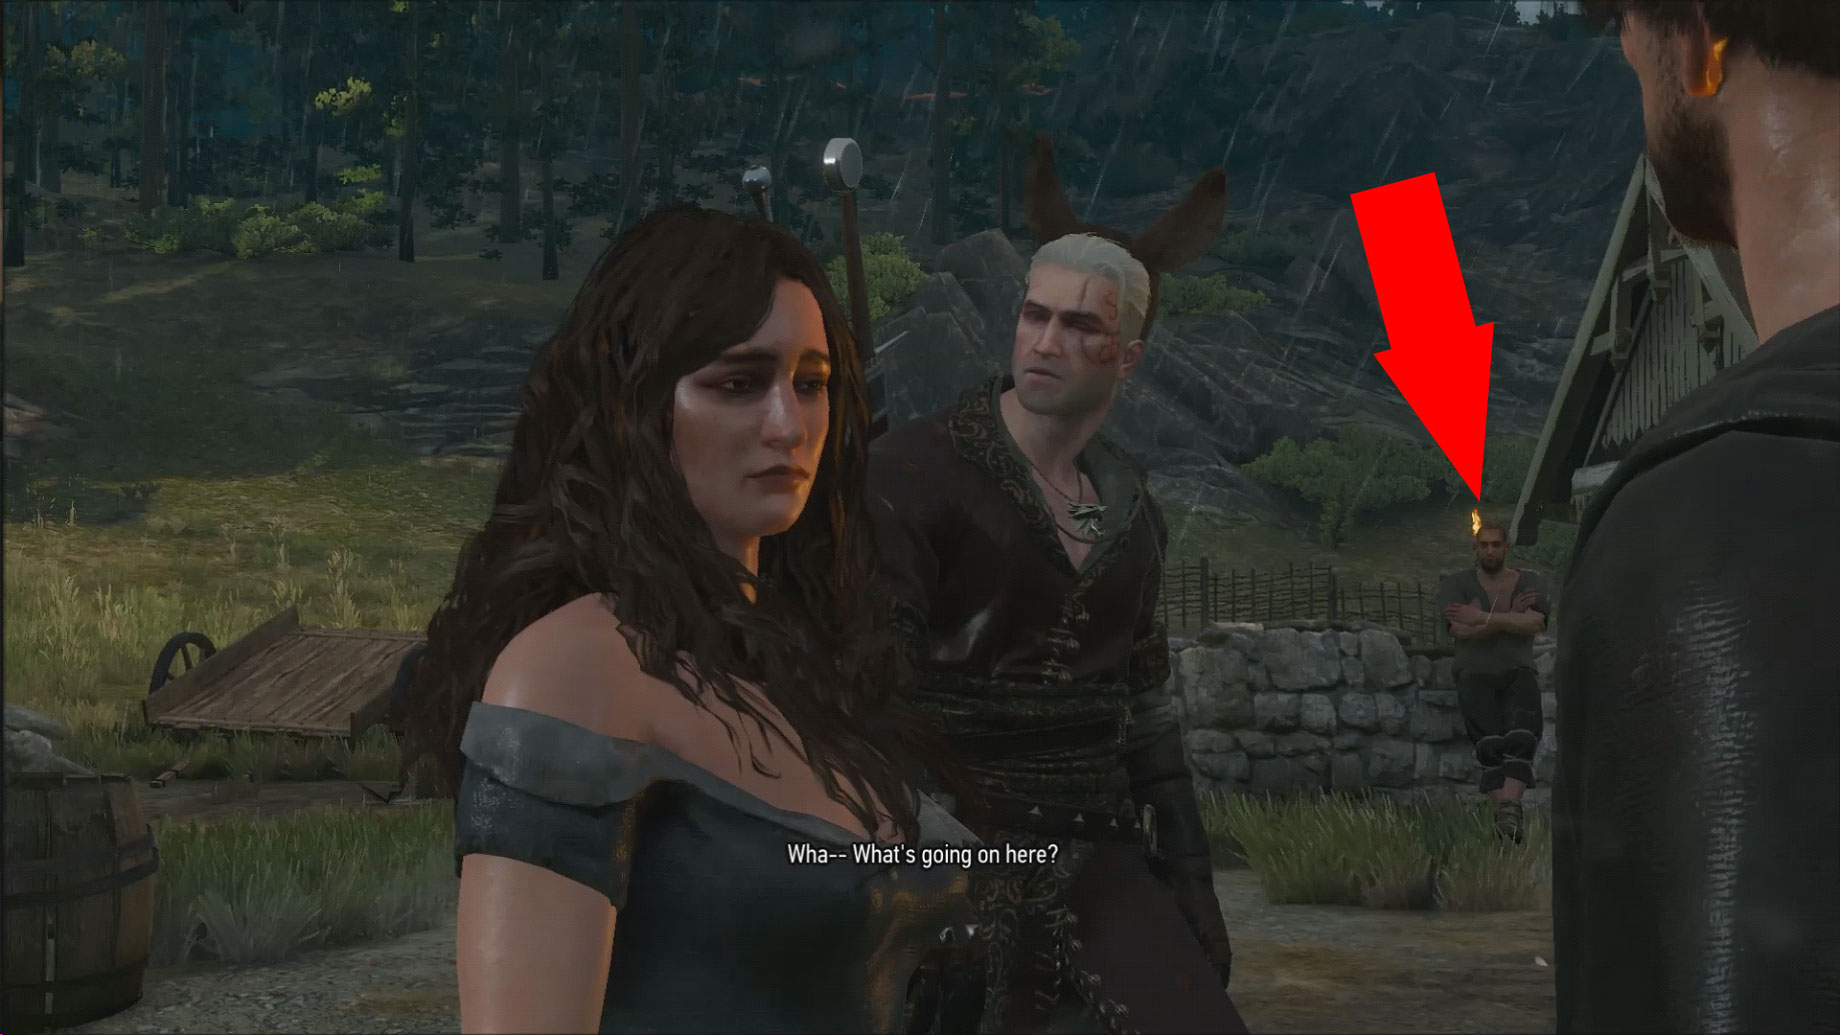 The Witcher 3 Riddle That Players Couldn’t Quite Solve